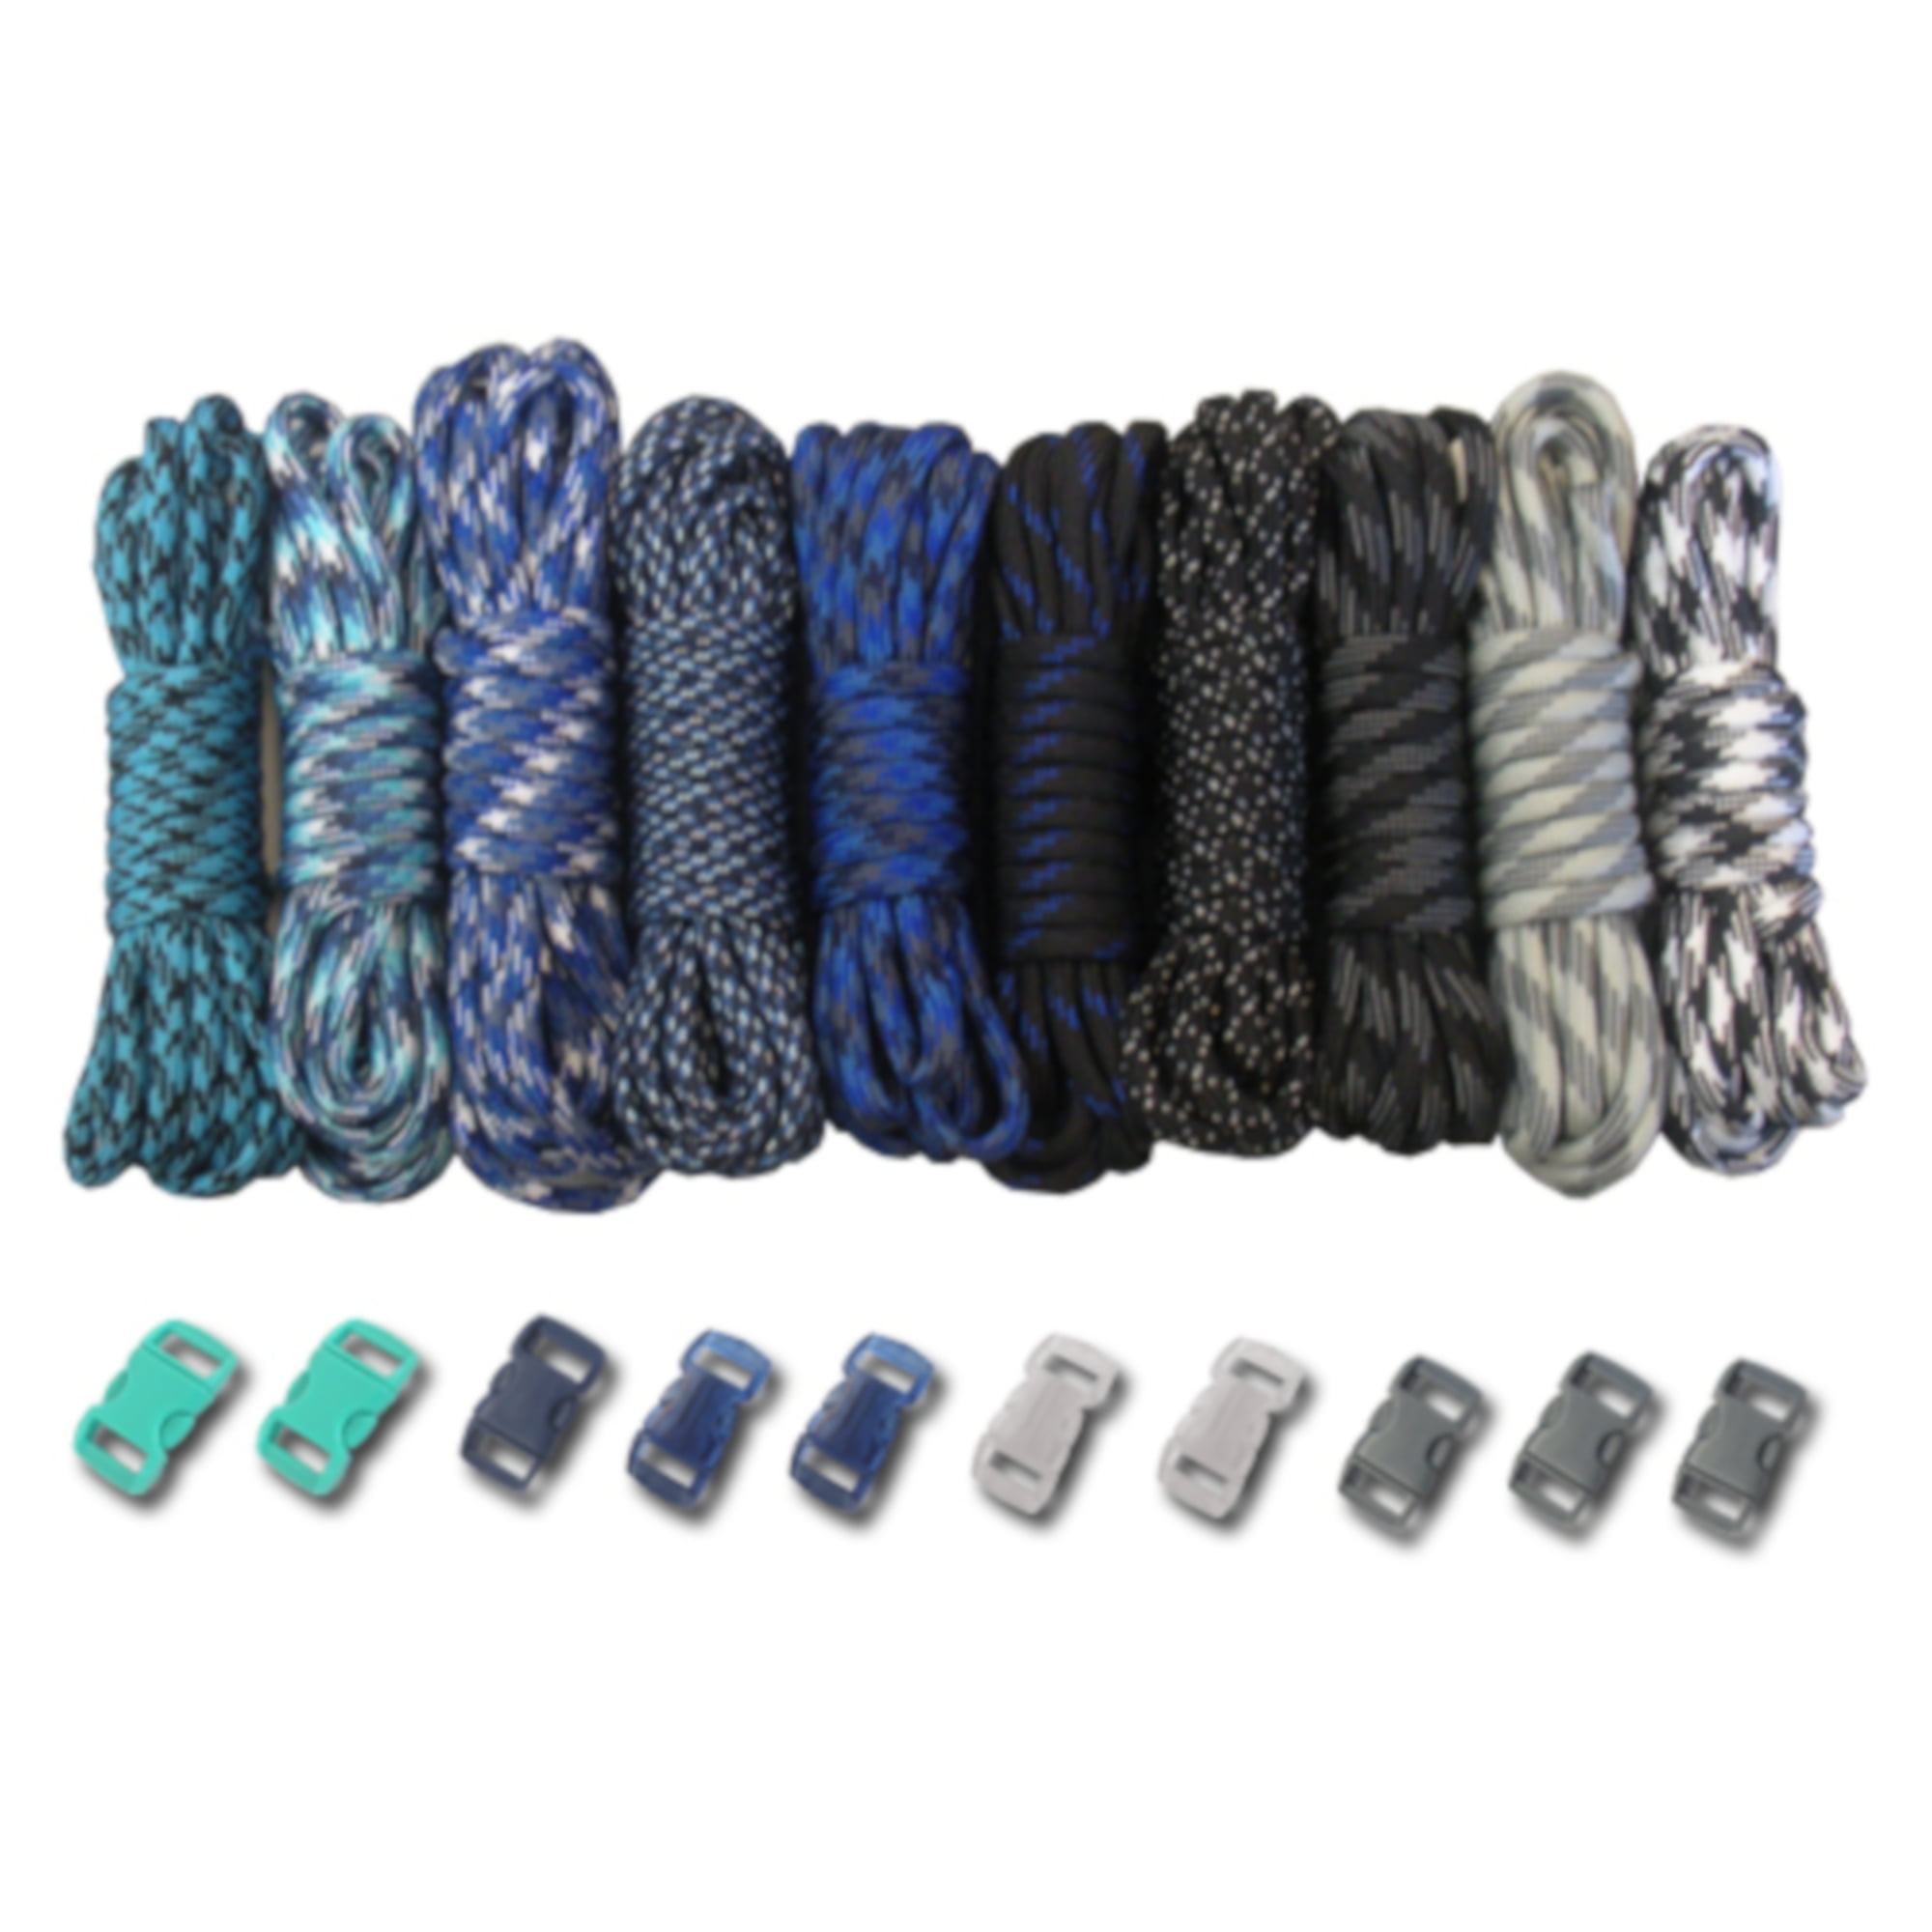 Paracord Planet Parachute Cord & Buckle Combo Kits Crafting Jewelry DIY Projects 